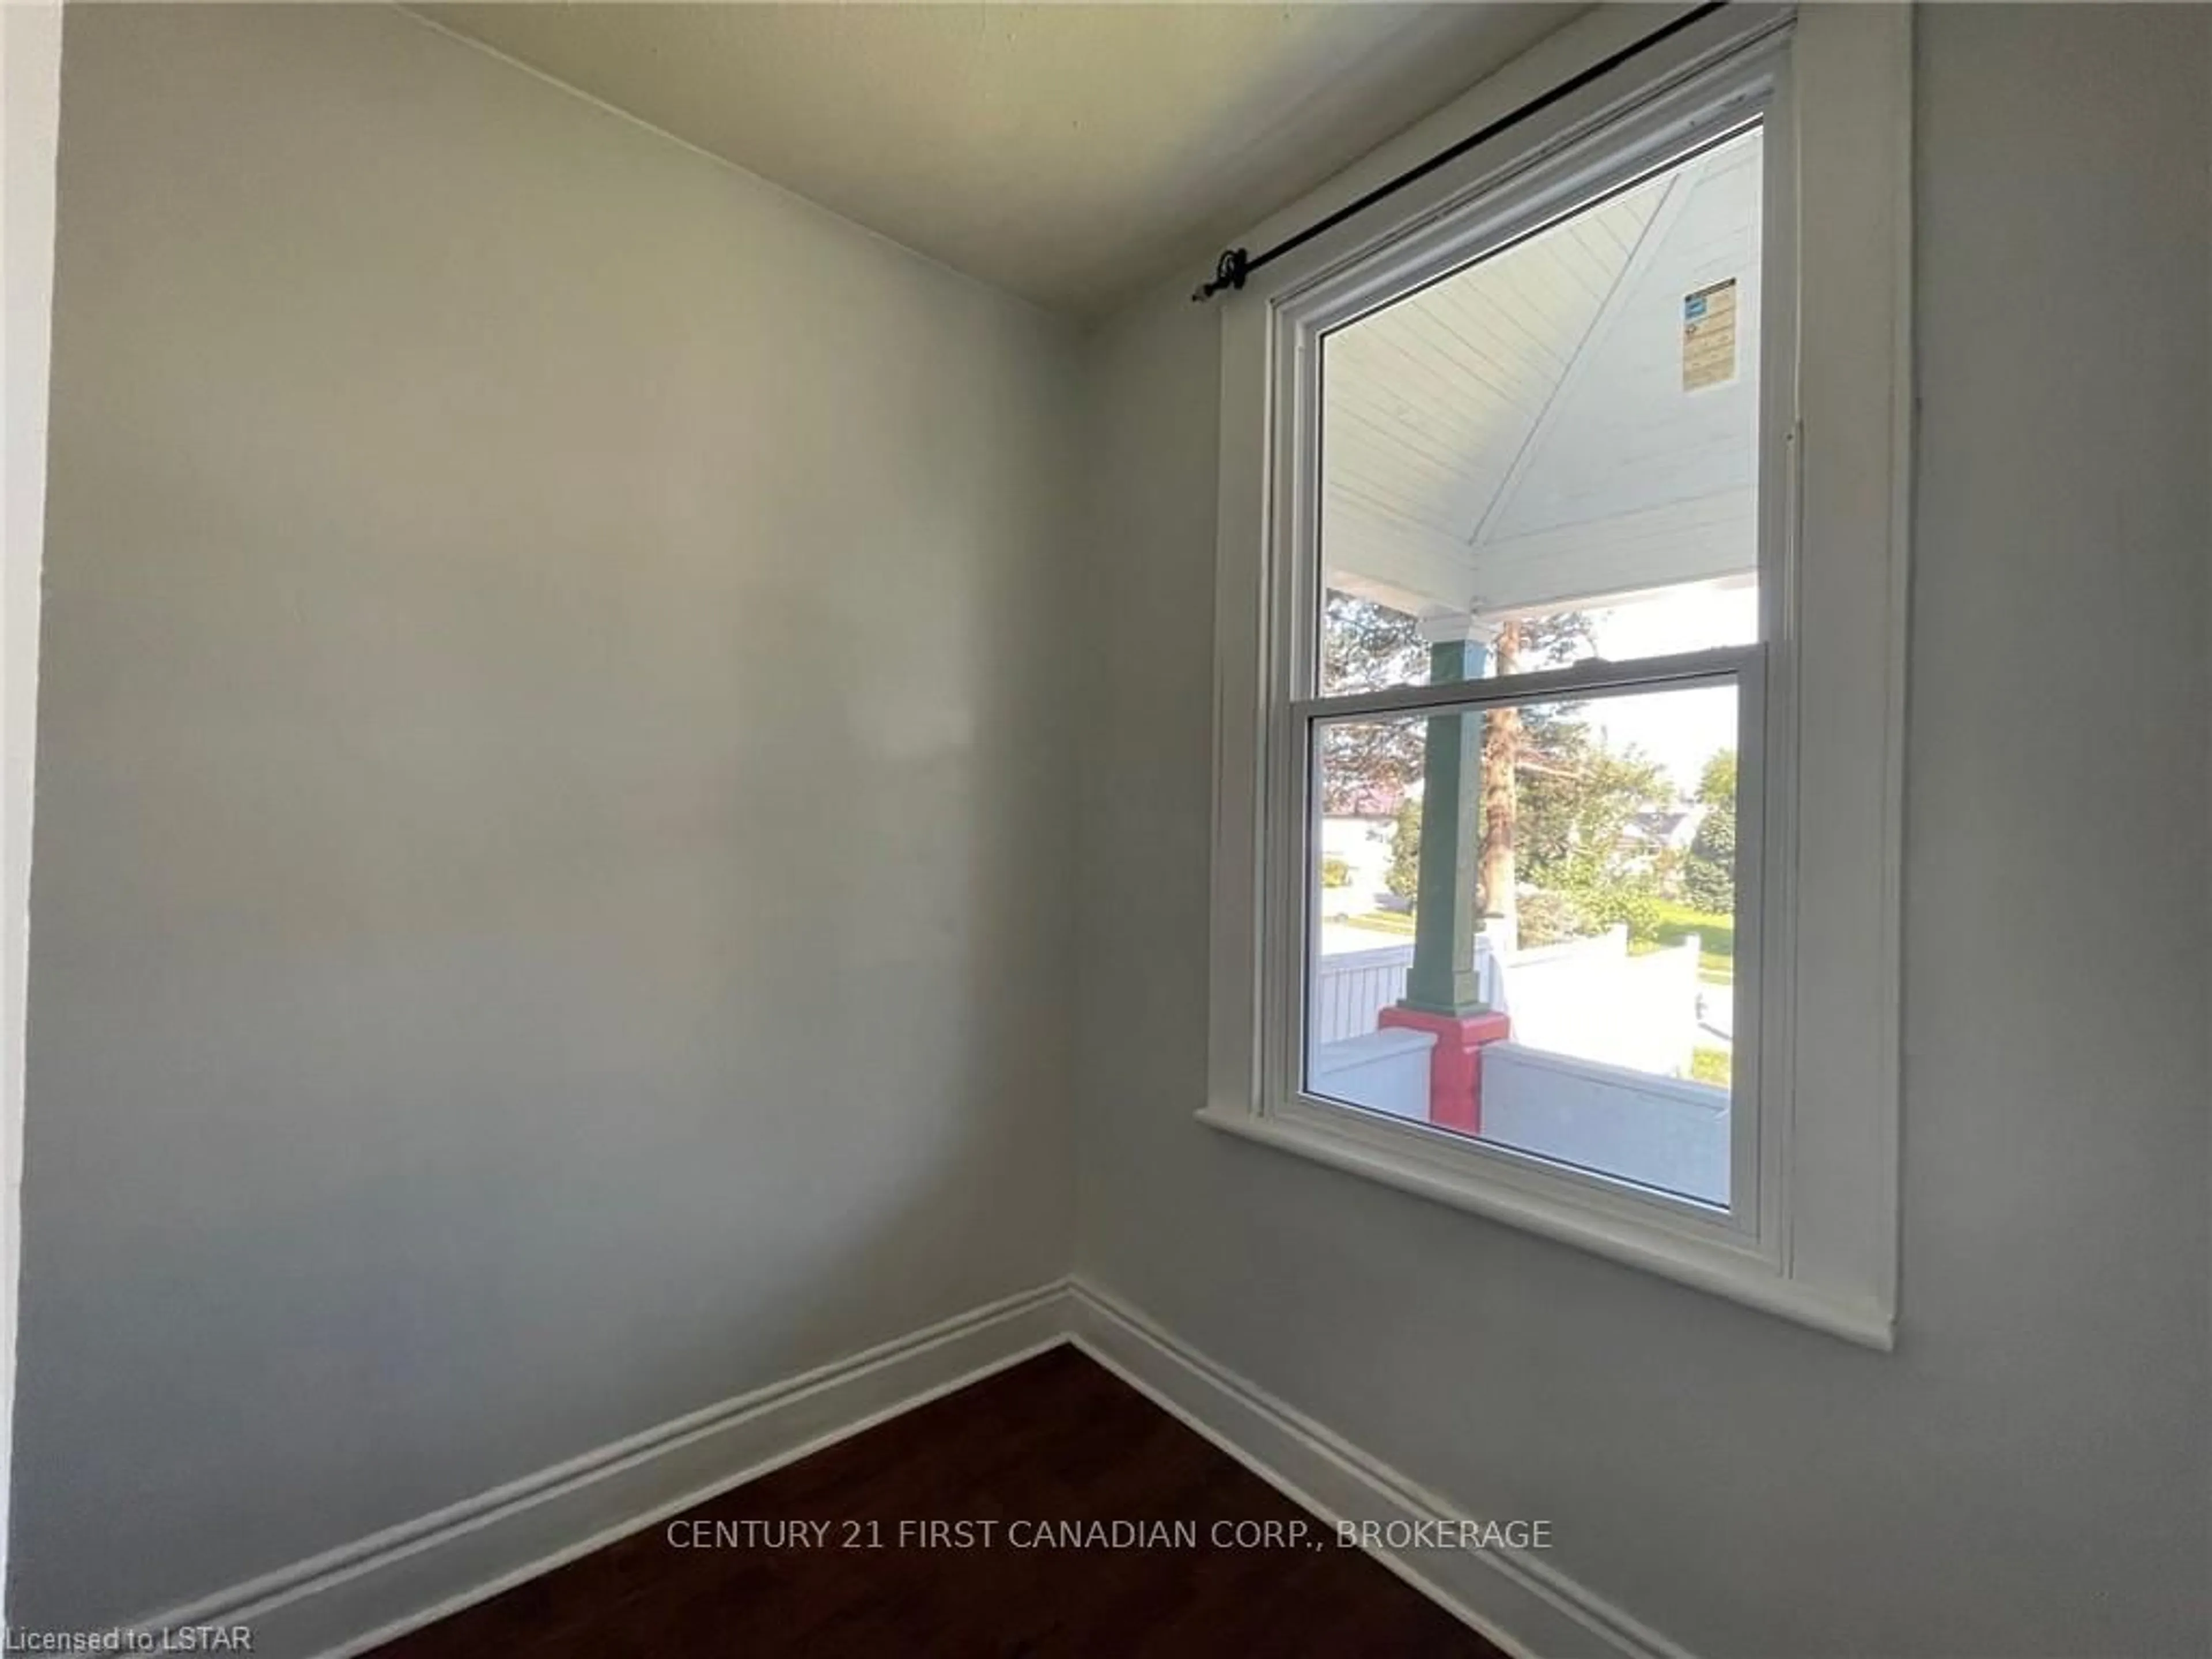 A pic of a room for 1025 York St, London Ontario N5W 2T4